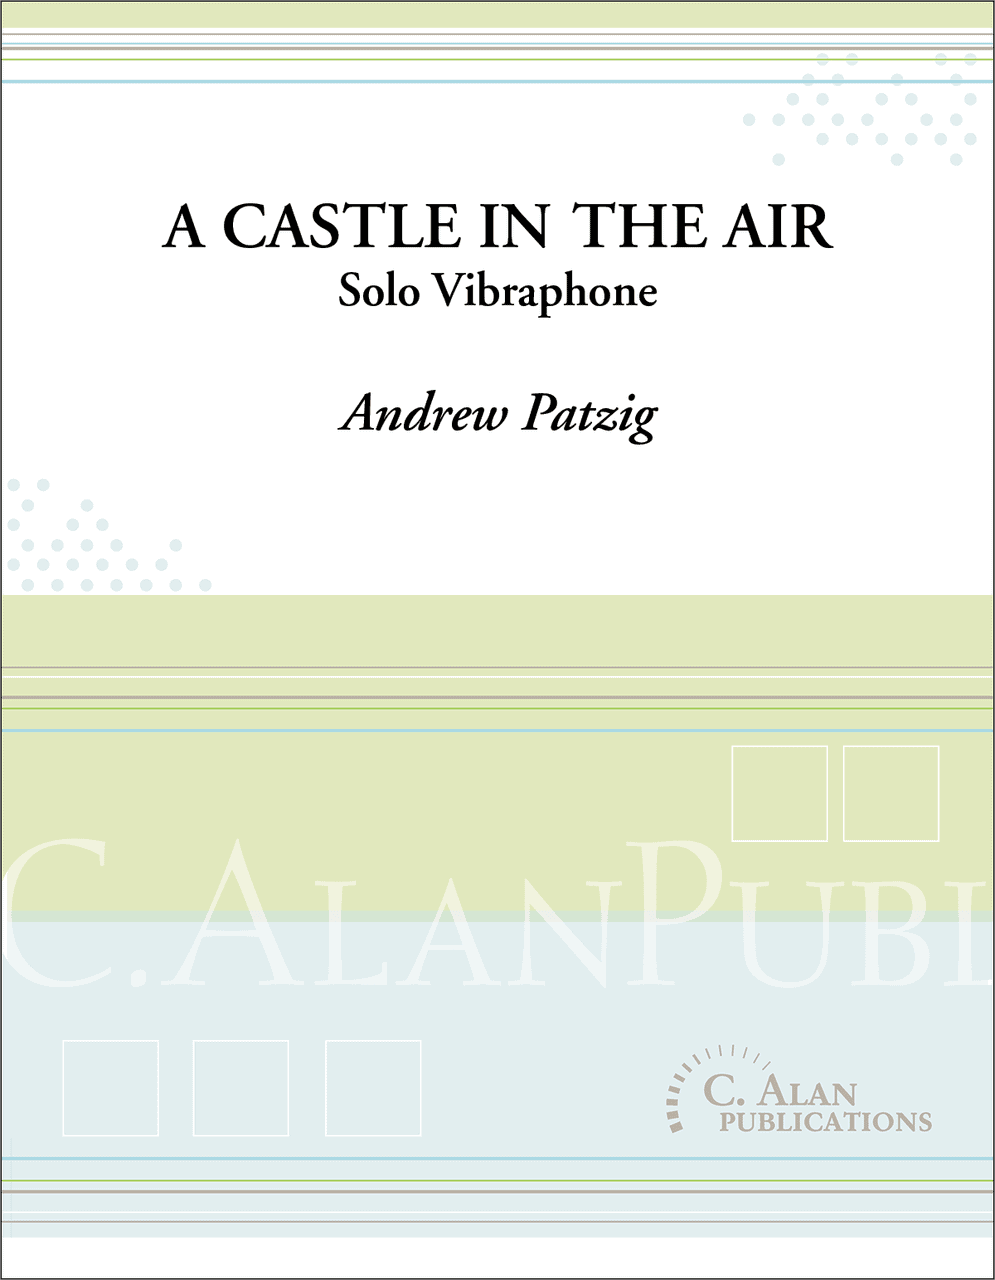 A Castle in the Air by Andrew Patzig